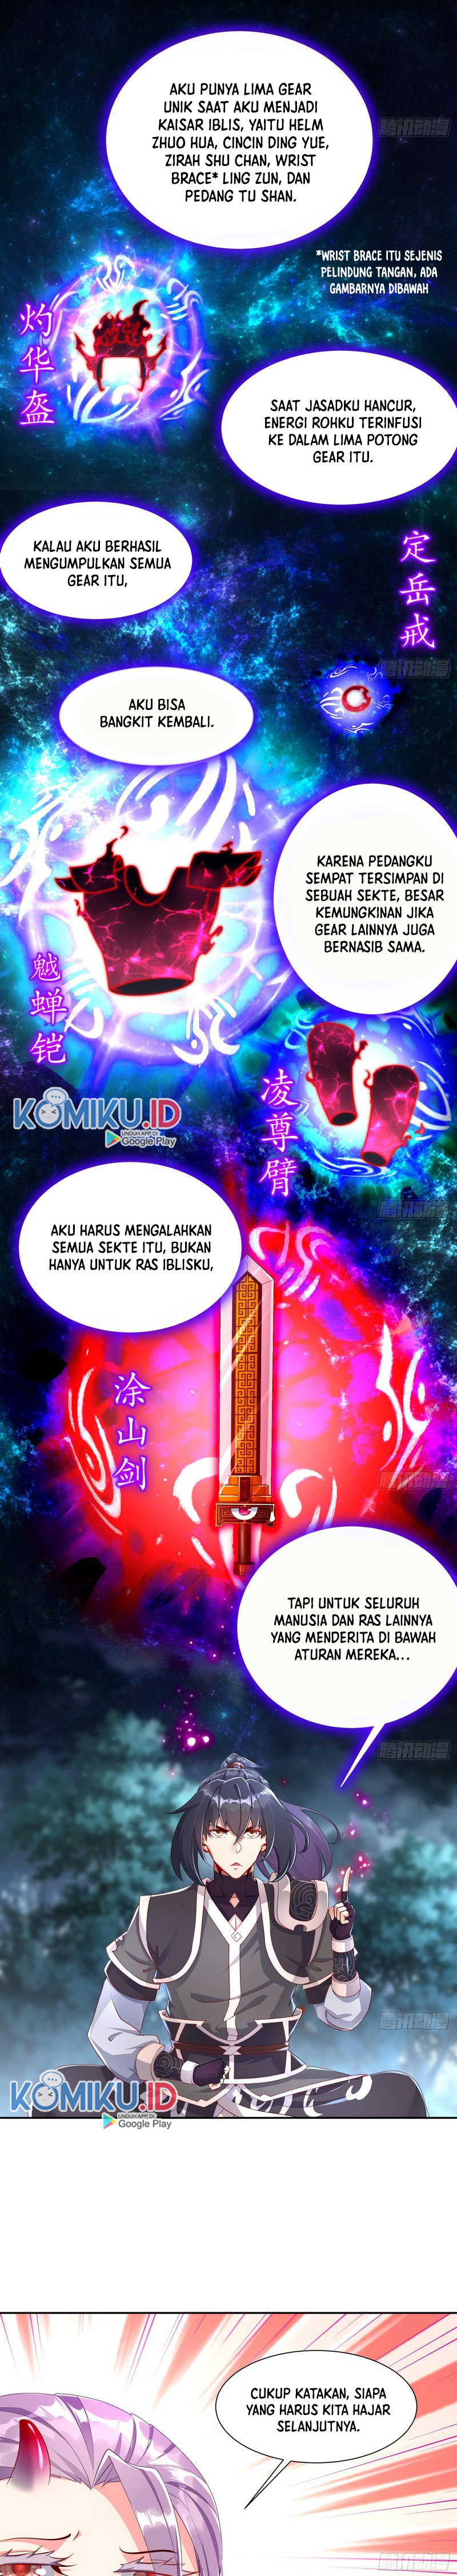 The Rebirth of the Demon God Chapter 80 6